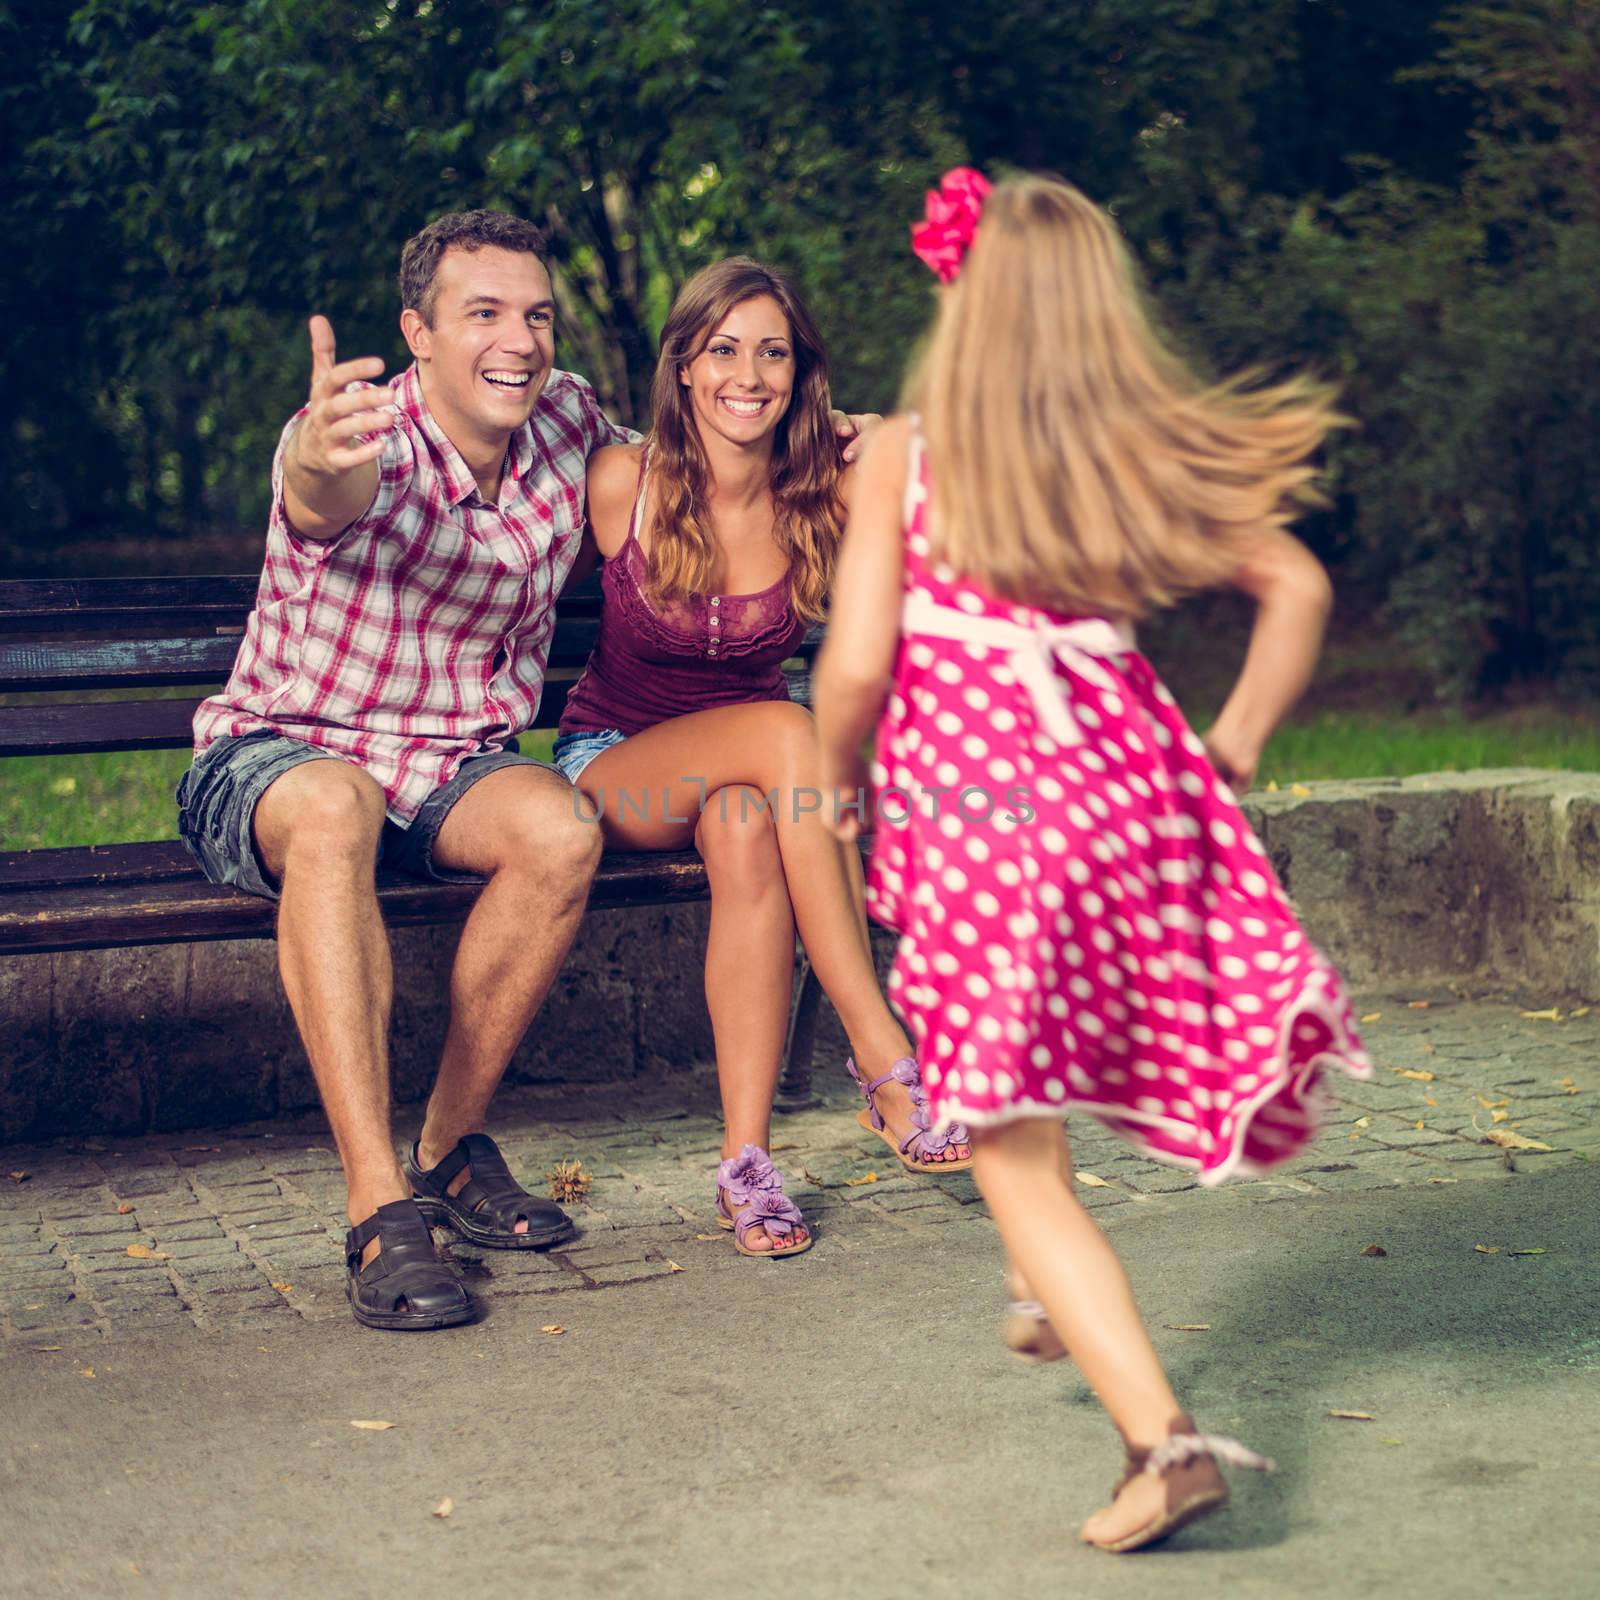 Cheerful Family In The Park by MilanMarkovic78